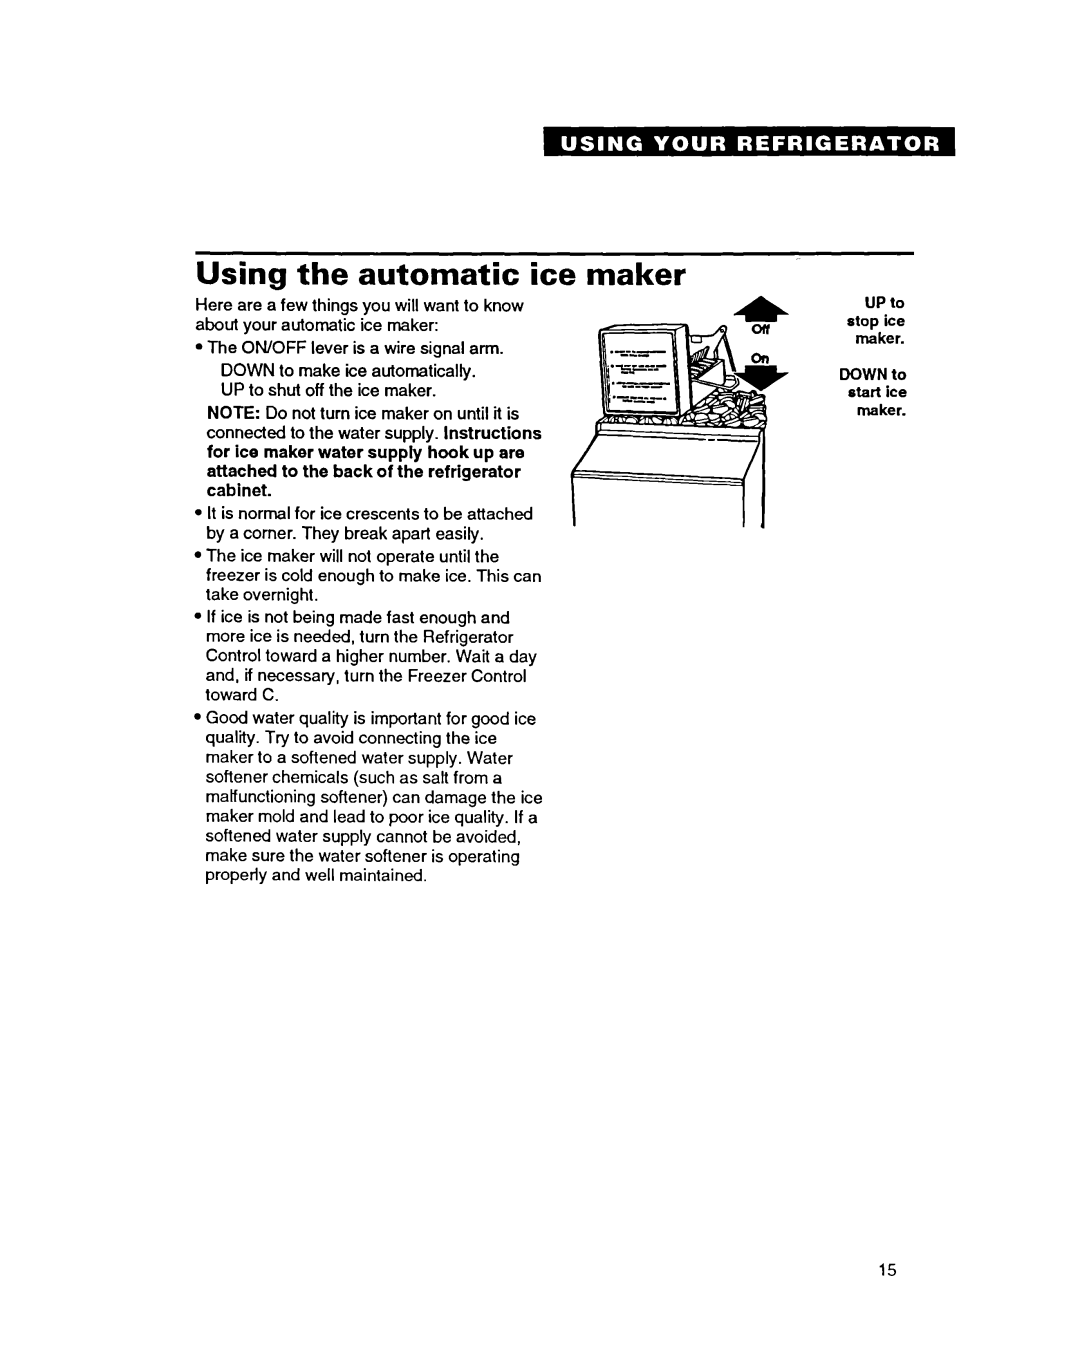 Whirlpool ED22PC important safety instructions Using, the automatic, for ice maker water supply hook up are, cabinet 